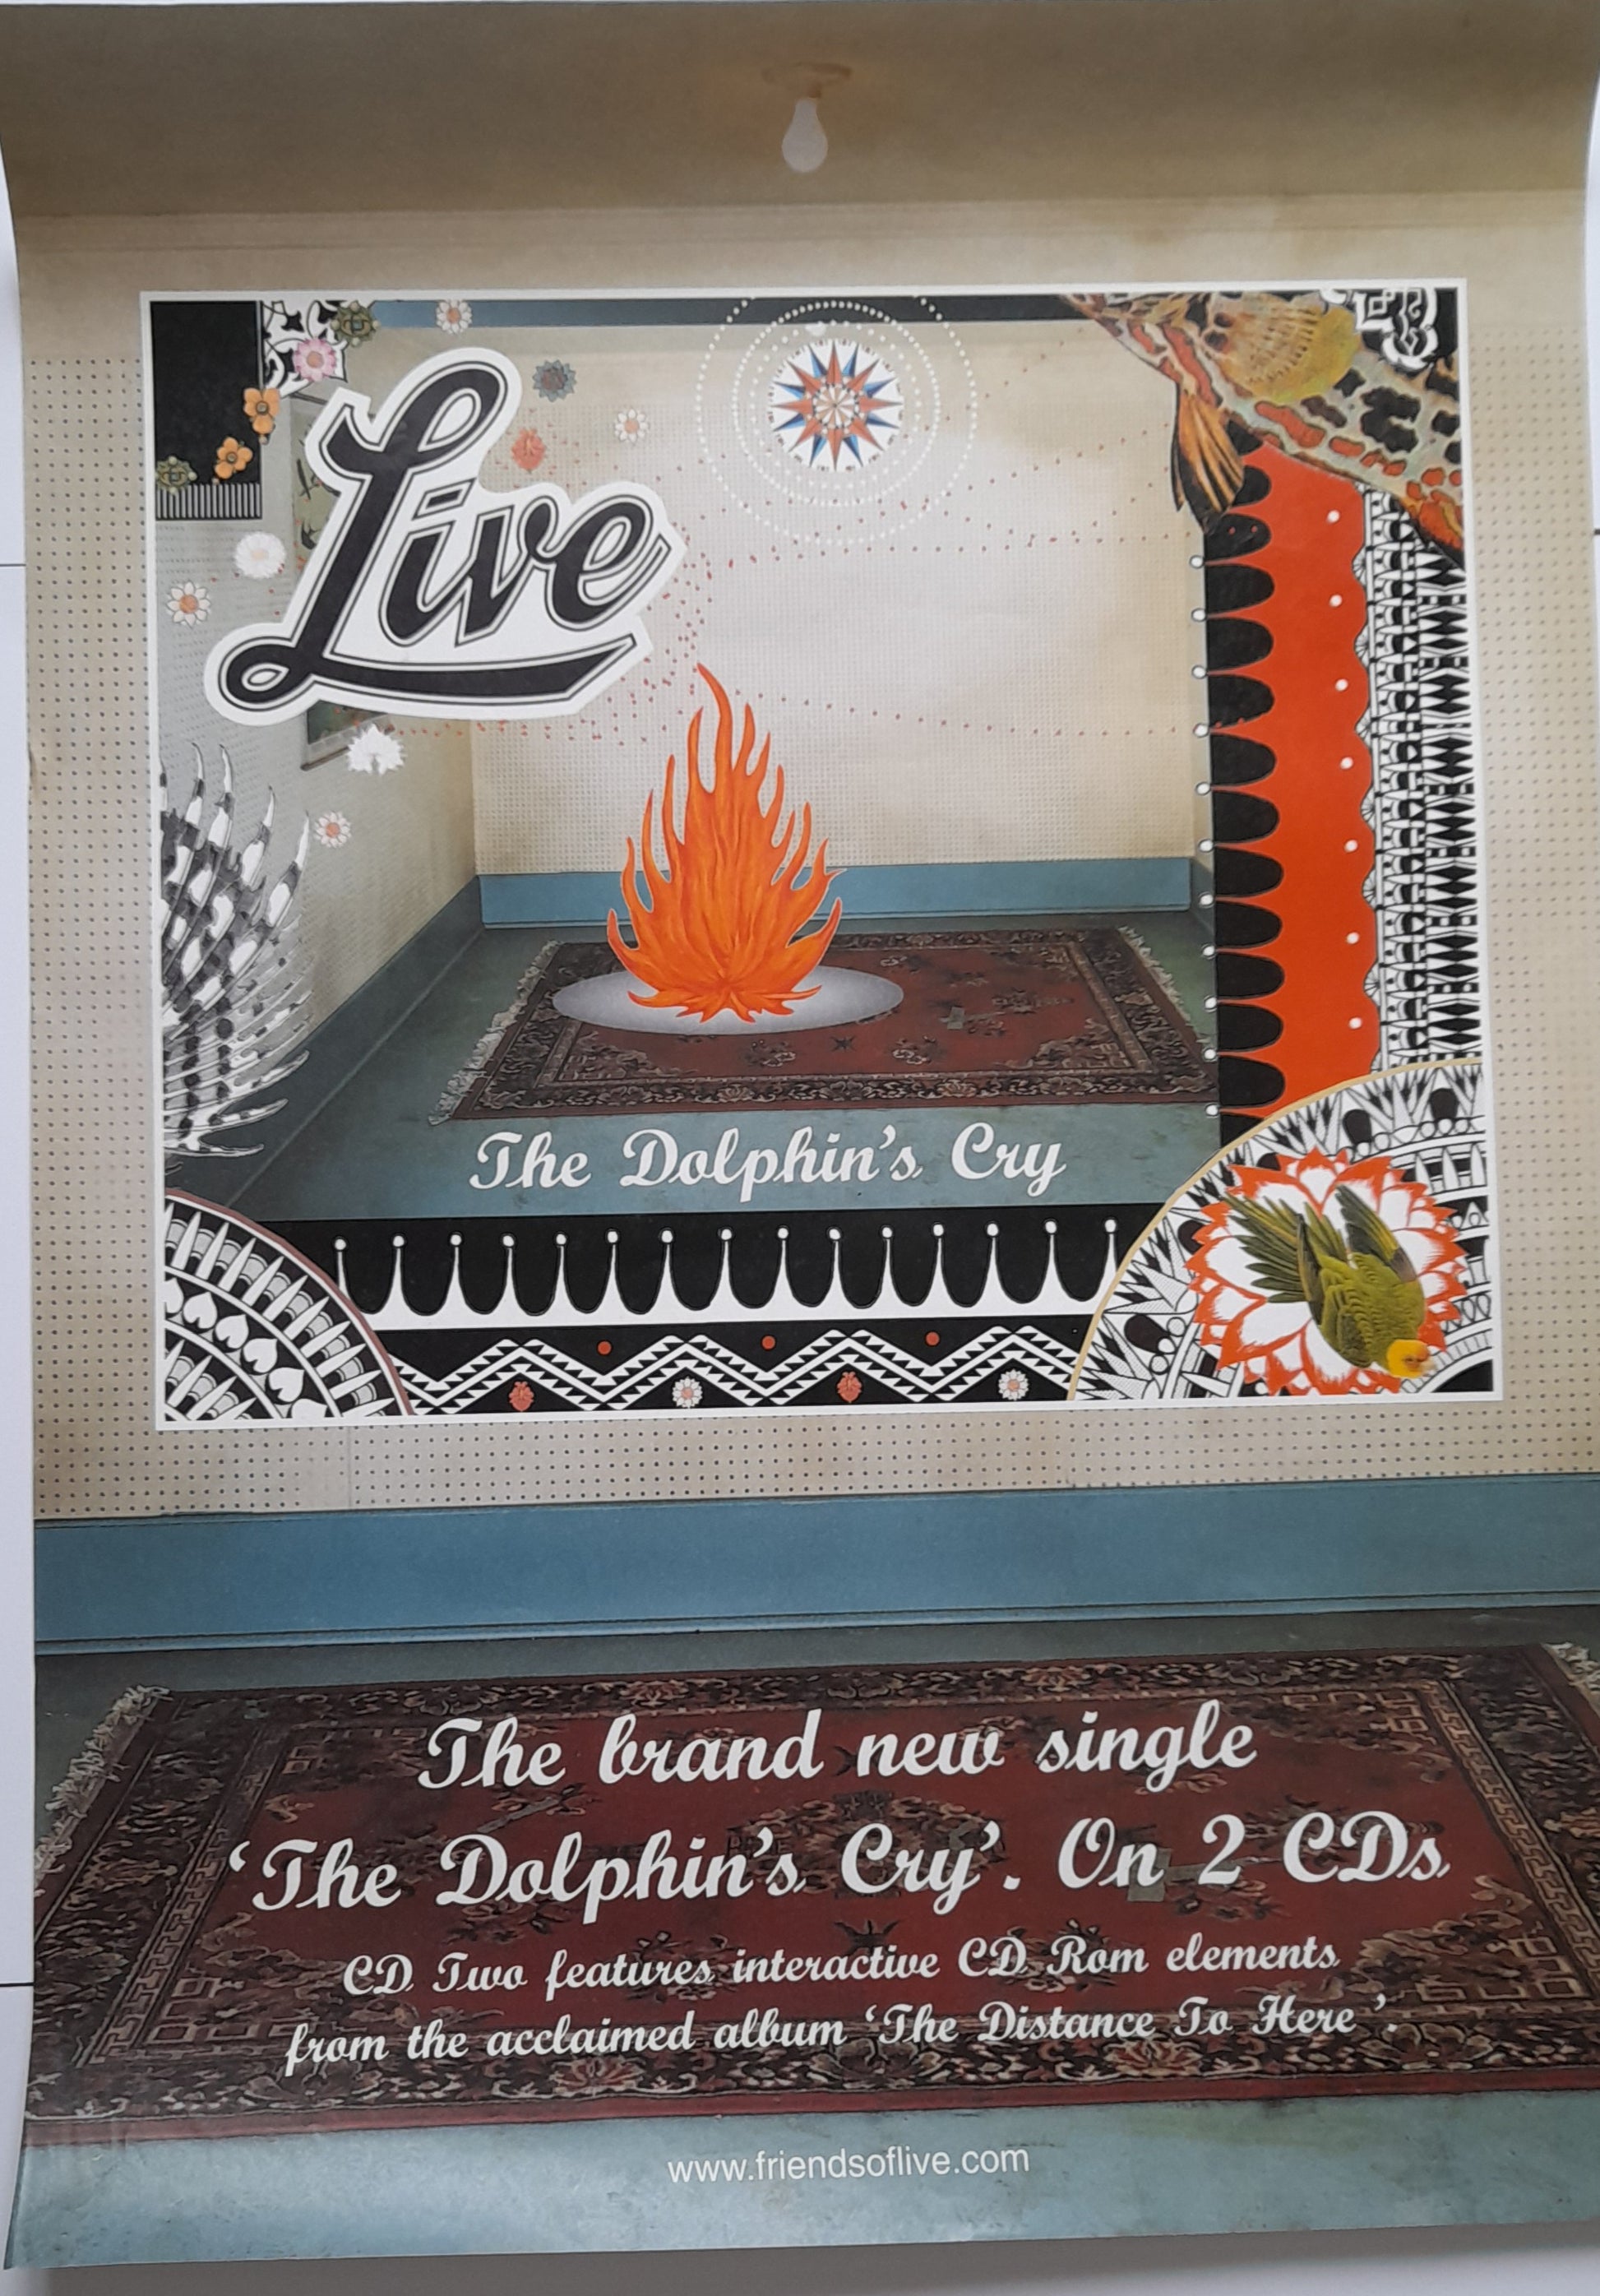 Live - The Dolphin's Cry Single UK Promotional Poster